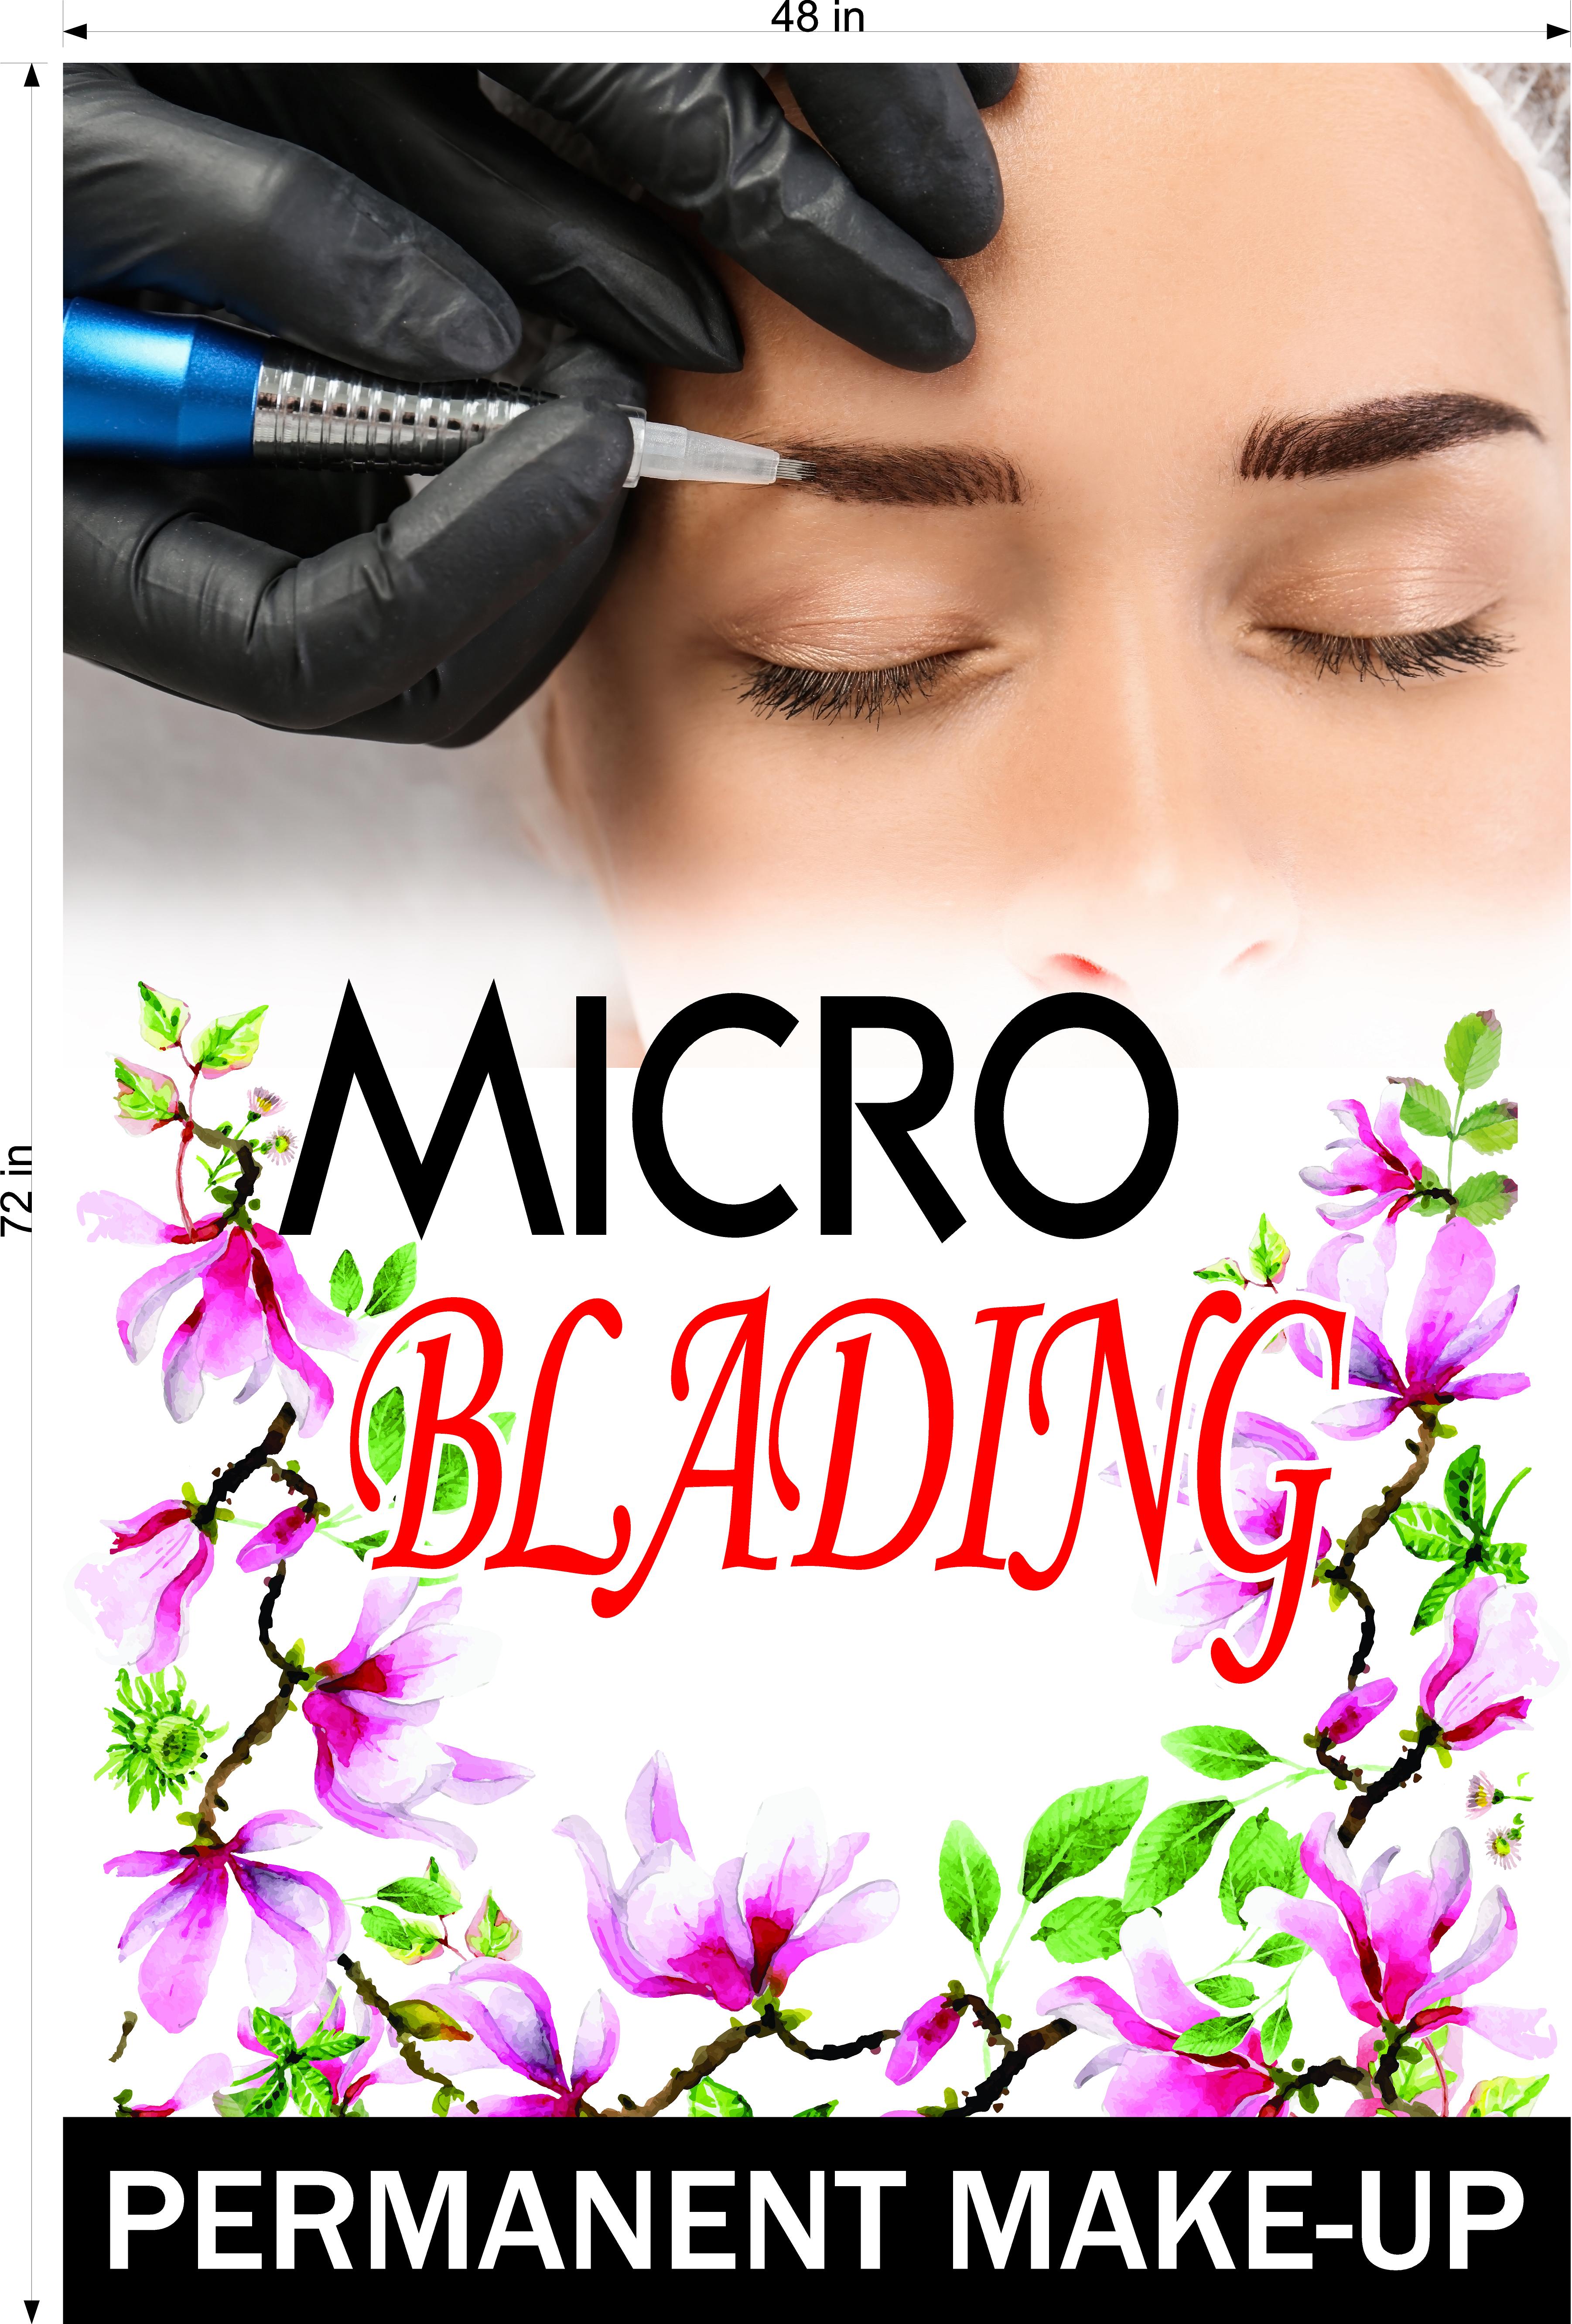 Microblading 11 Perforated Mesh One Way Vision See-Through Window Vinyl Salon Services Permanent Make-Up Vertical